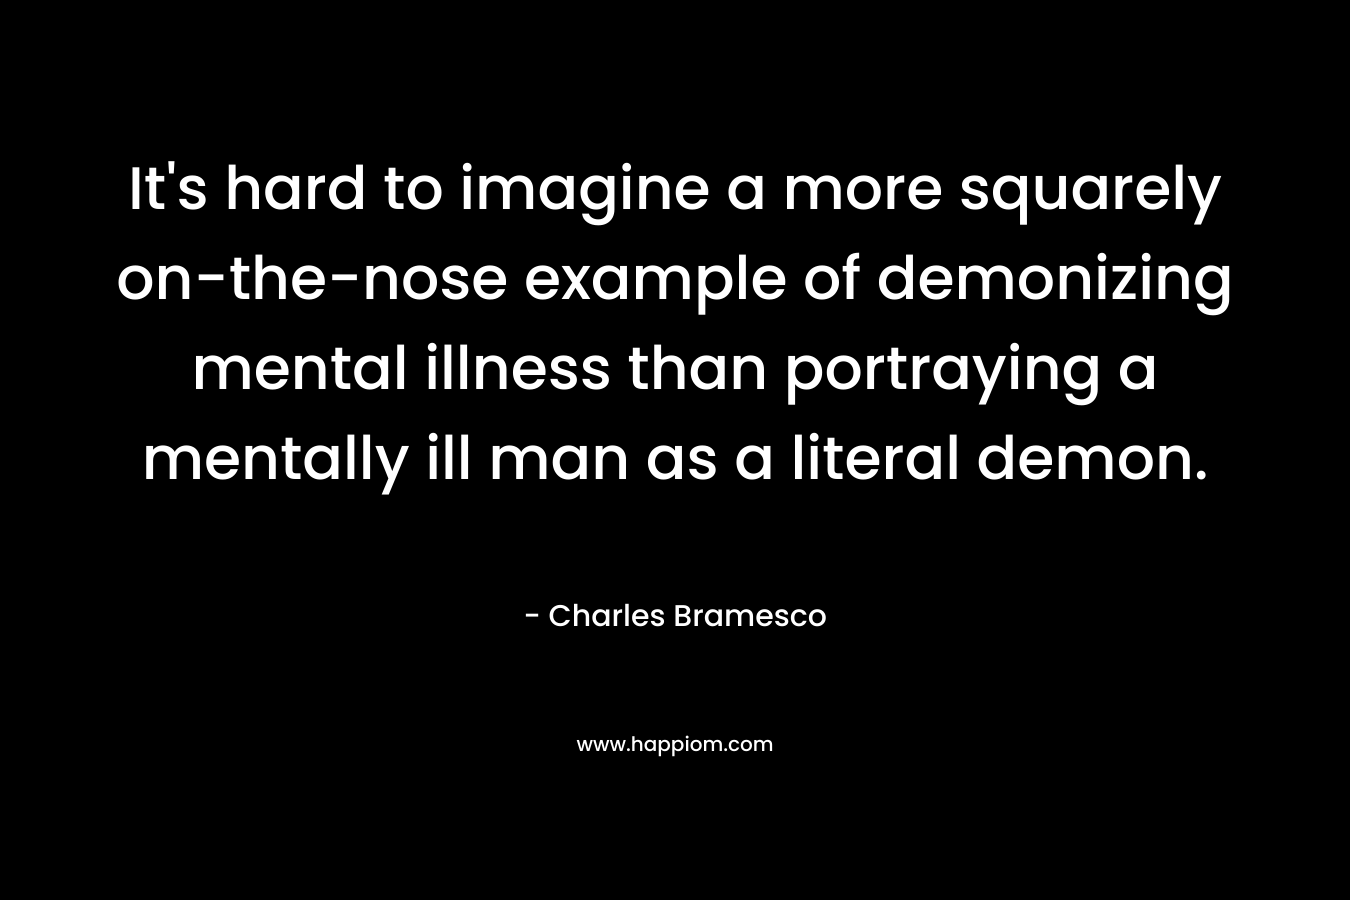 It’s hard to imagine a more squarely on-the-nose example of demonizing mental illness than portraying a mentally ill man as a literal demon. – Charles Bramesco